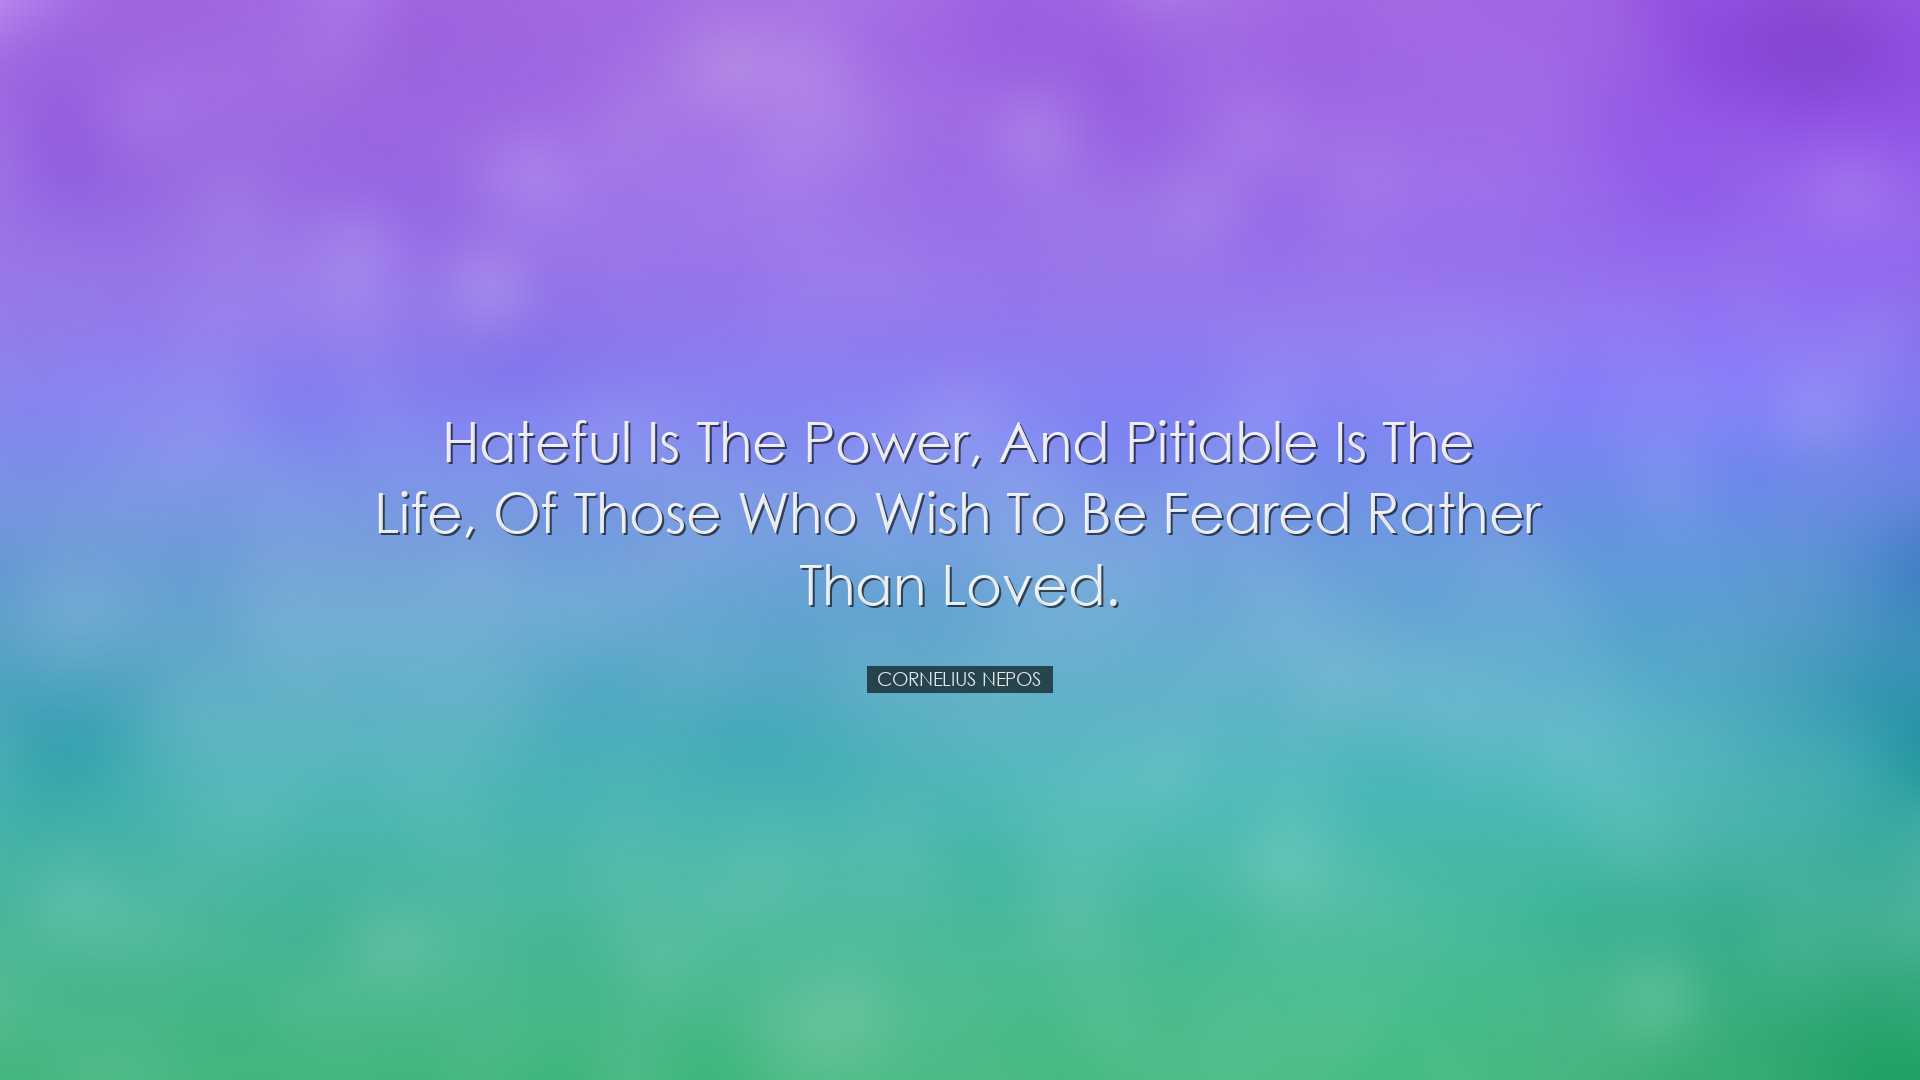 Hateful is the power, and pitiable is the life, of those who wish